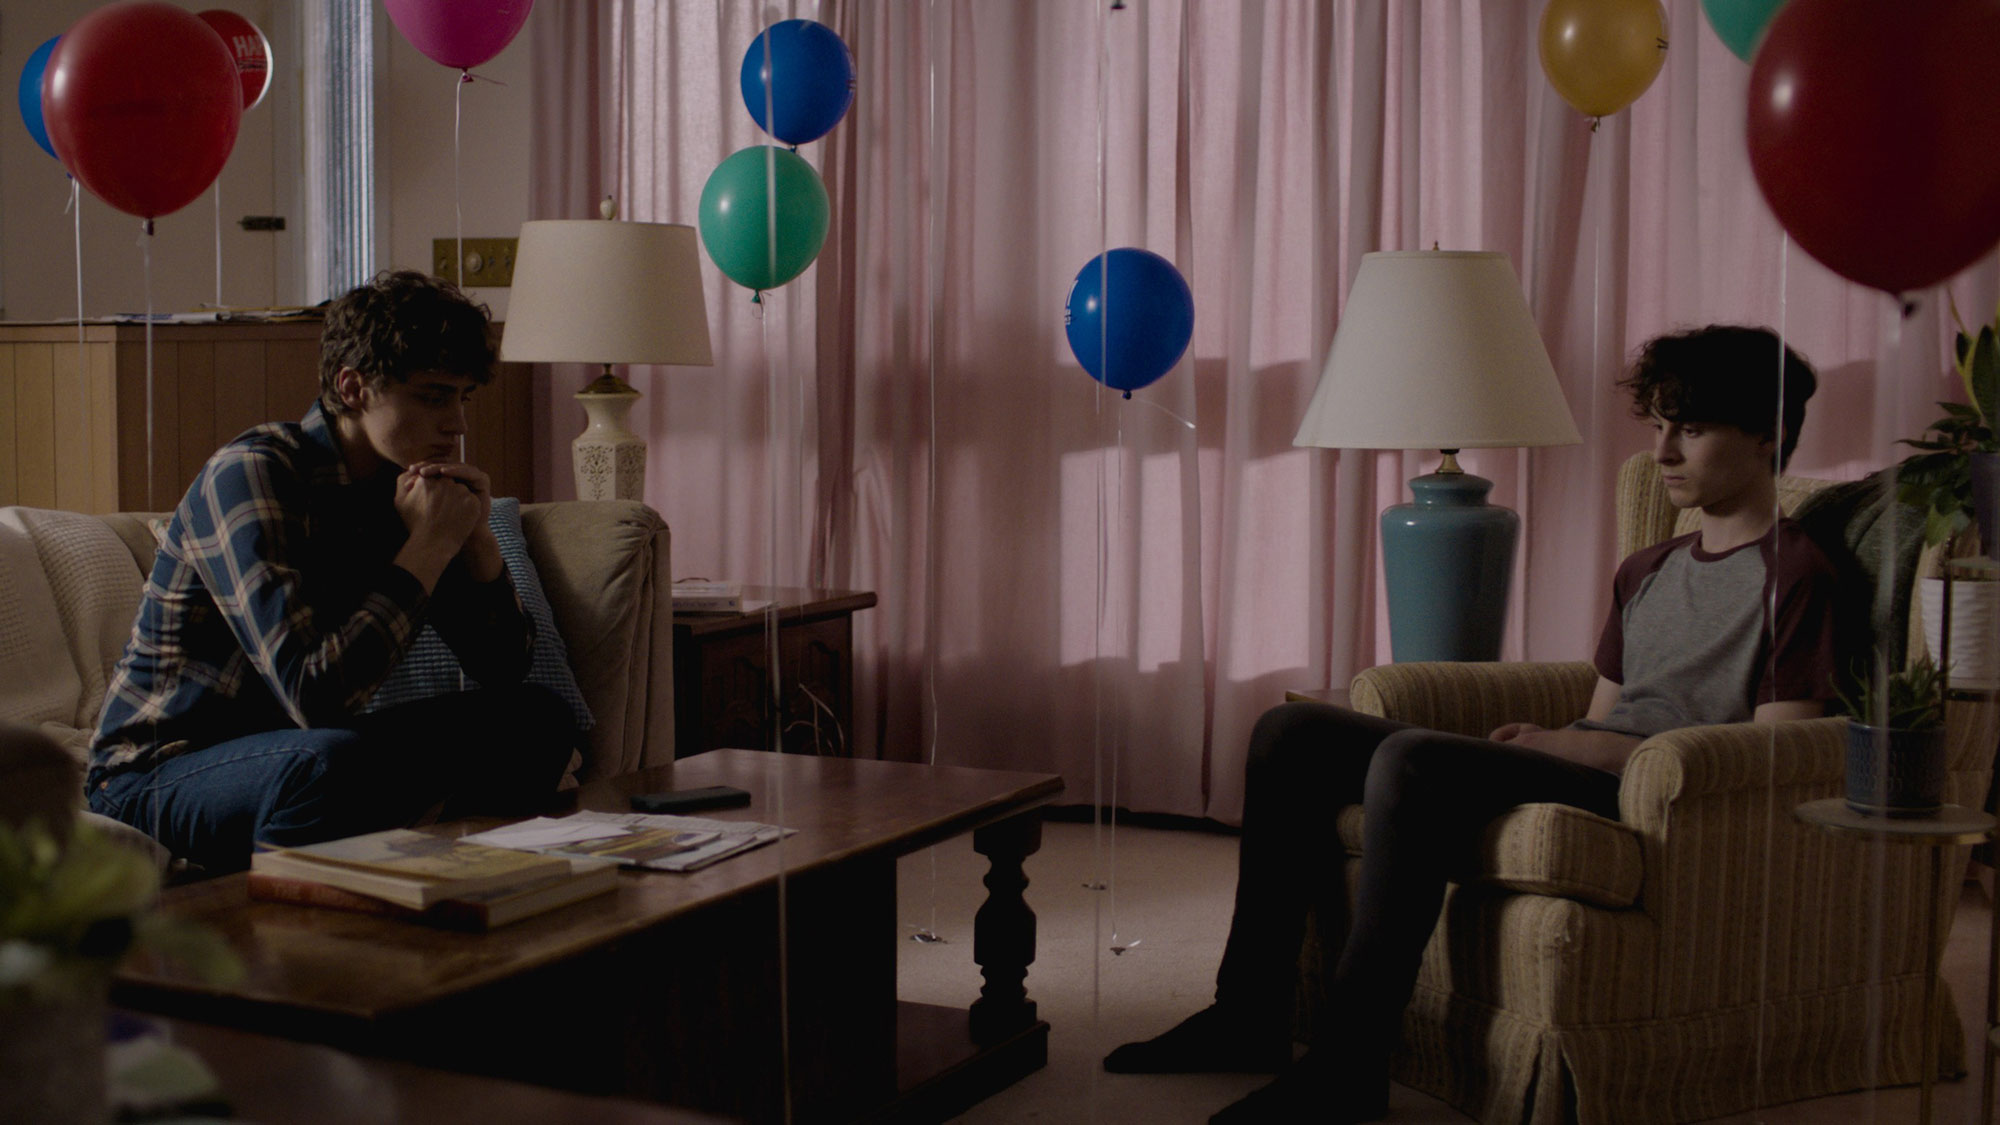 Two somber young people sit in a living room filled with colorful balloons